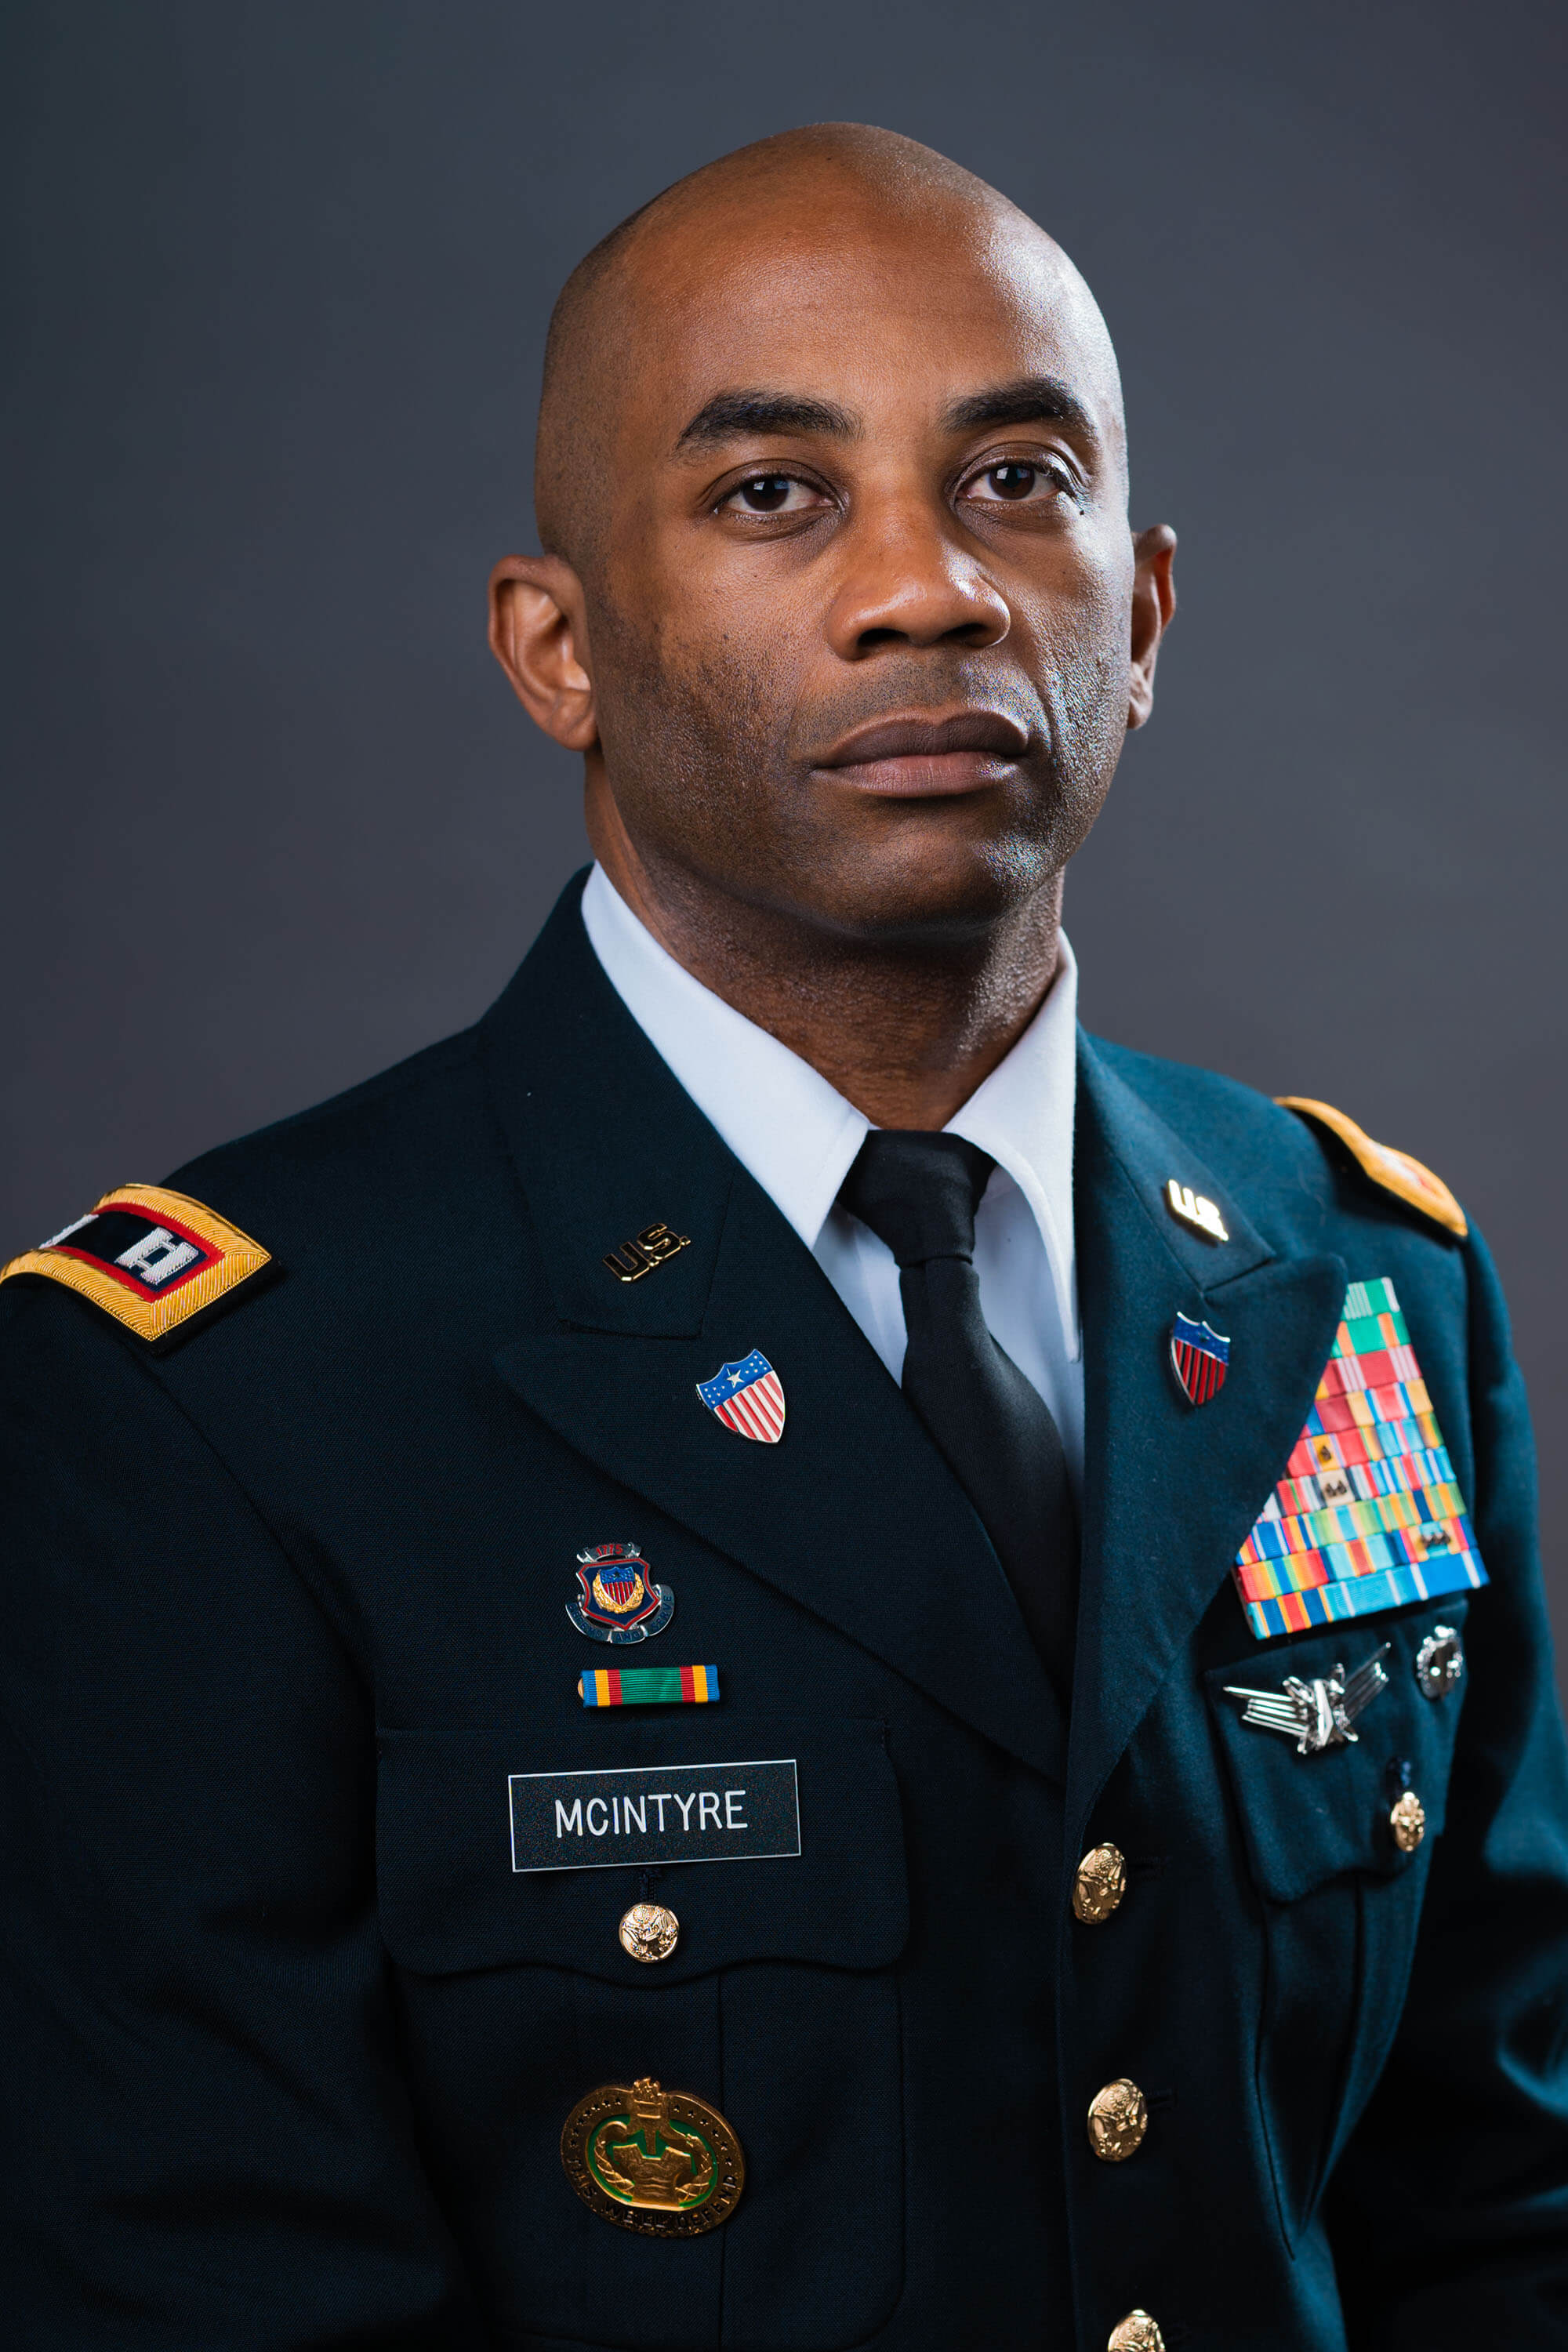 Picture of CPT Lonnie C. McIntyre 